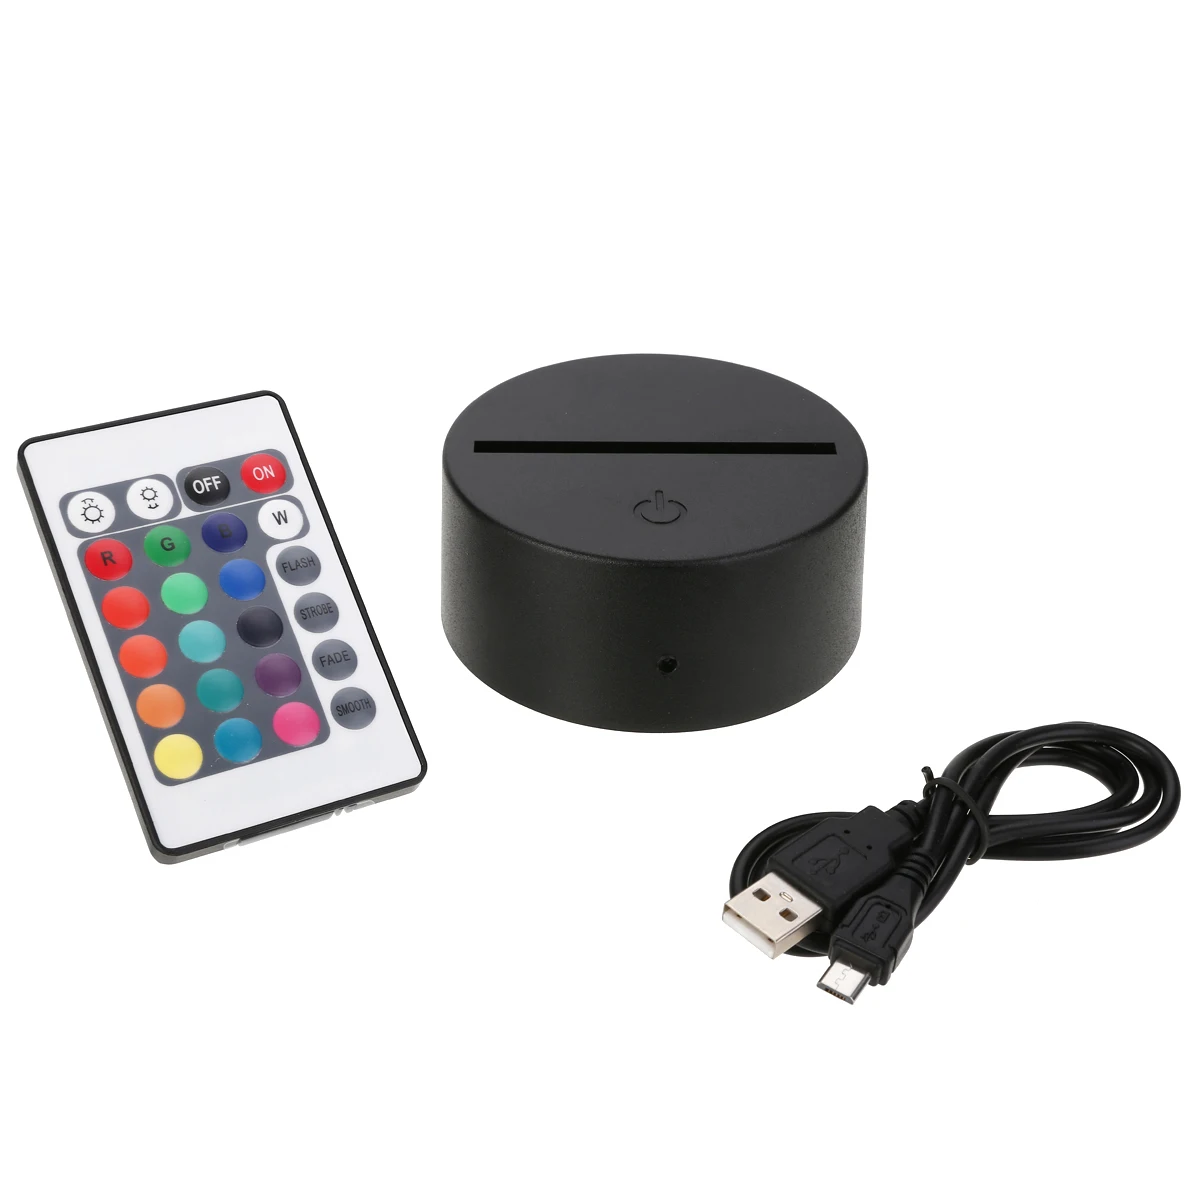 ABS Acrylic Black 3D LED Lamp Night Light Base USB Cable Remote Control Gift